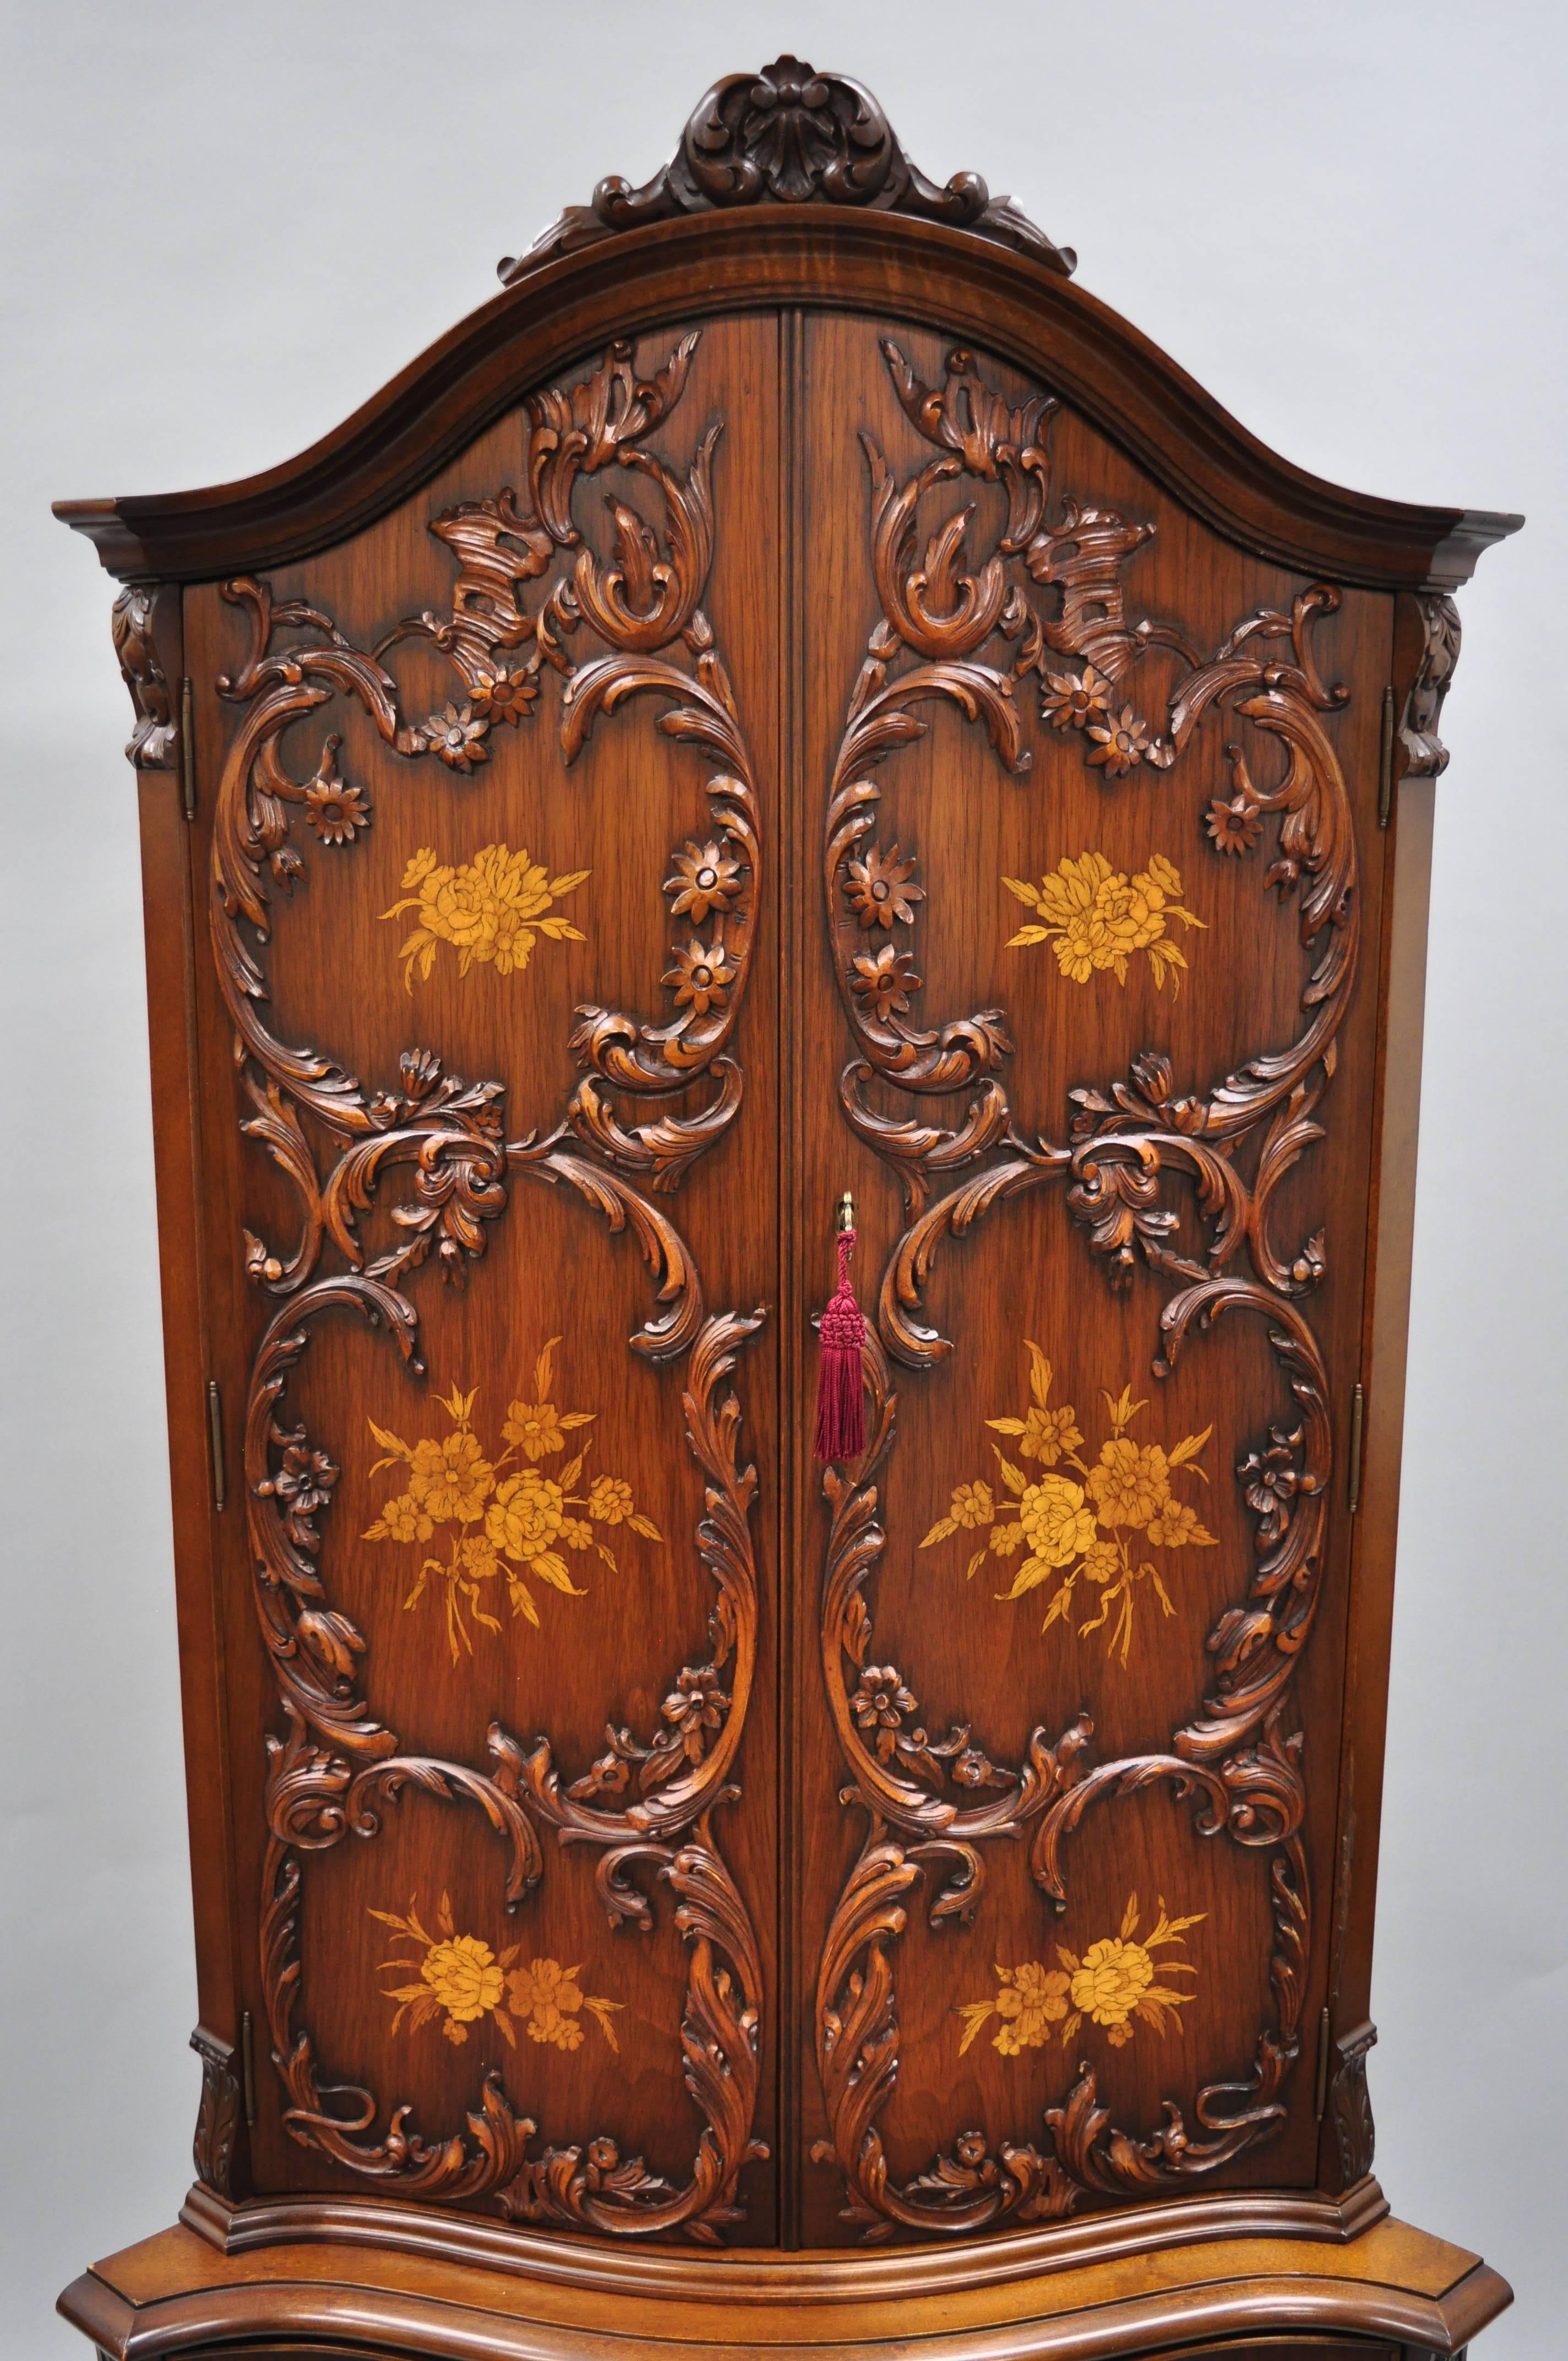 Impressive vintage French Louis XV style small walnut corner Curio China cabinet with satinwood inlay. Item features a serpentine front, ornate satinwood floral inlay, finely carved flower and acanthus raised scroll-work, nice smaller size, working